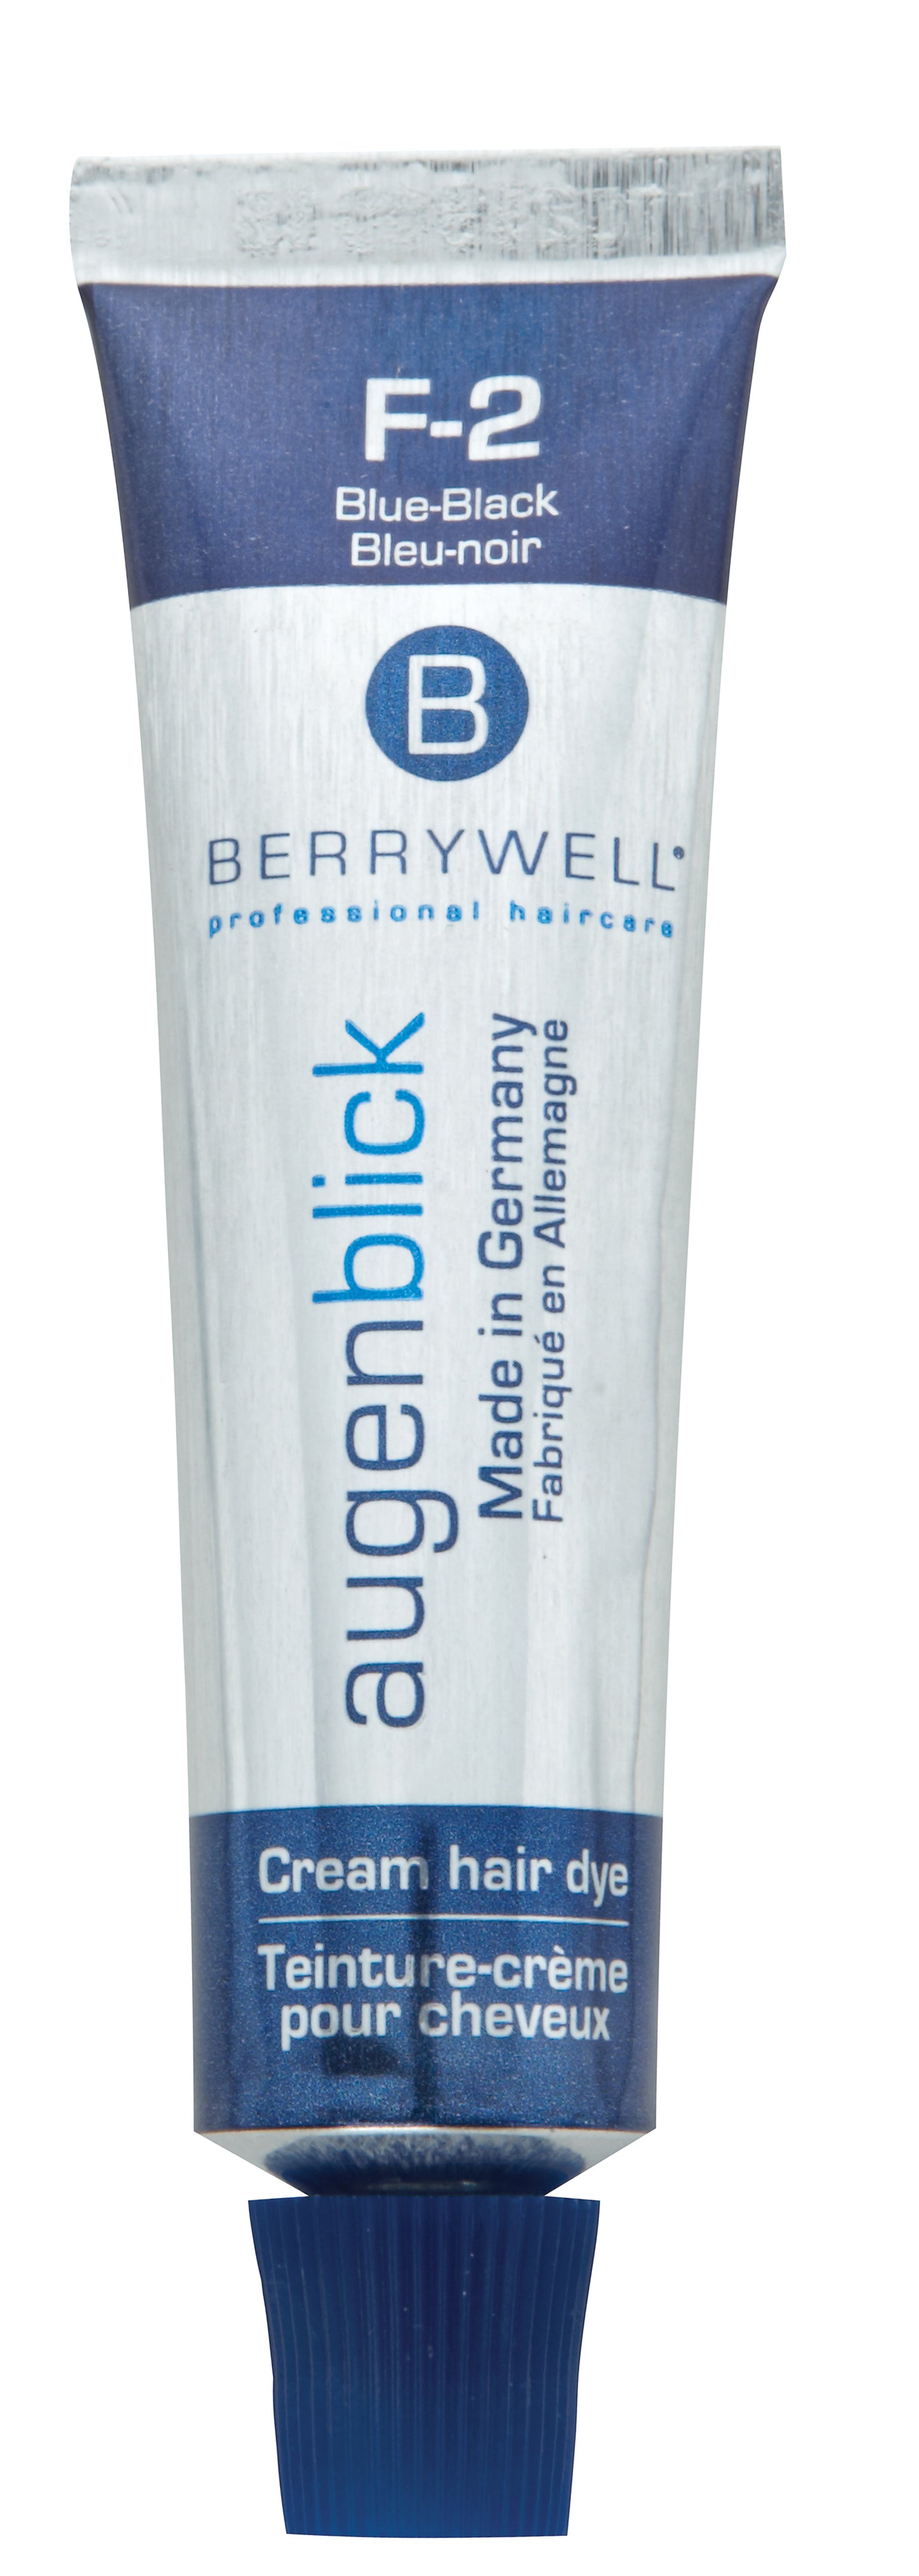 Berrywell Professional Haircare